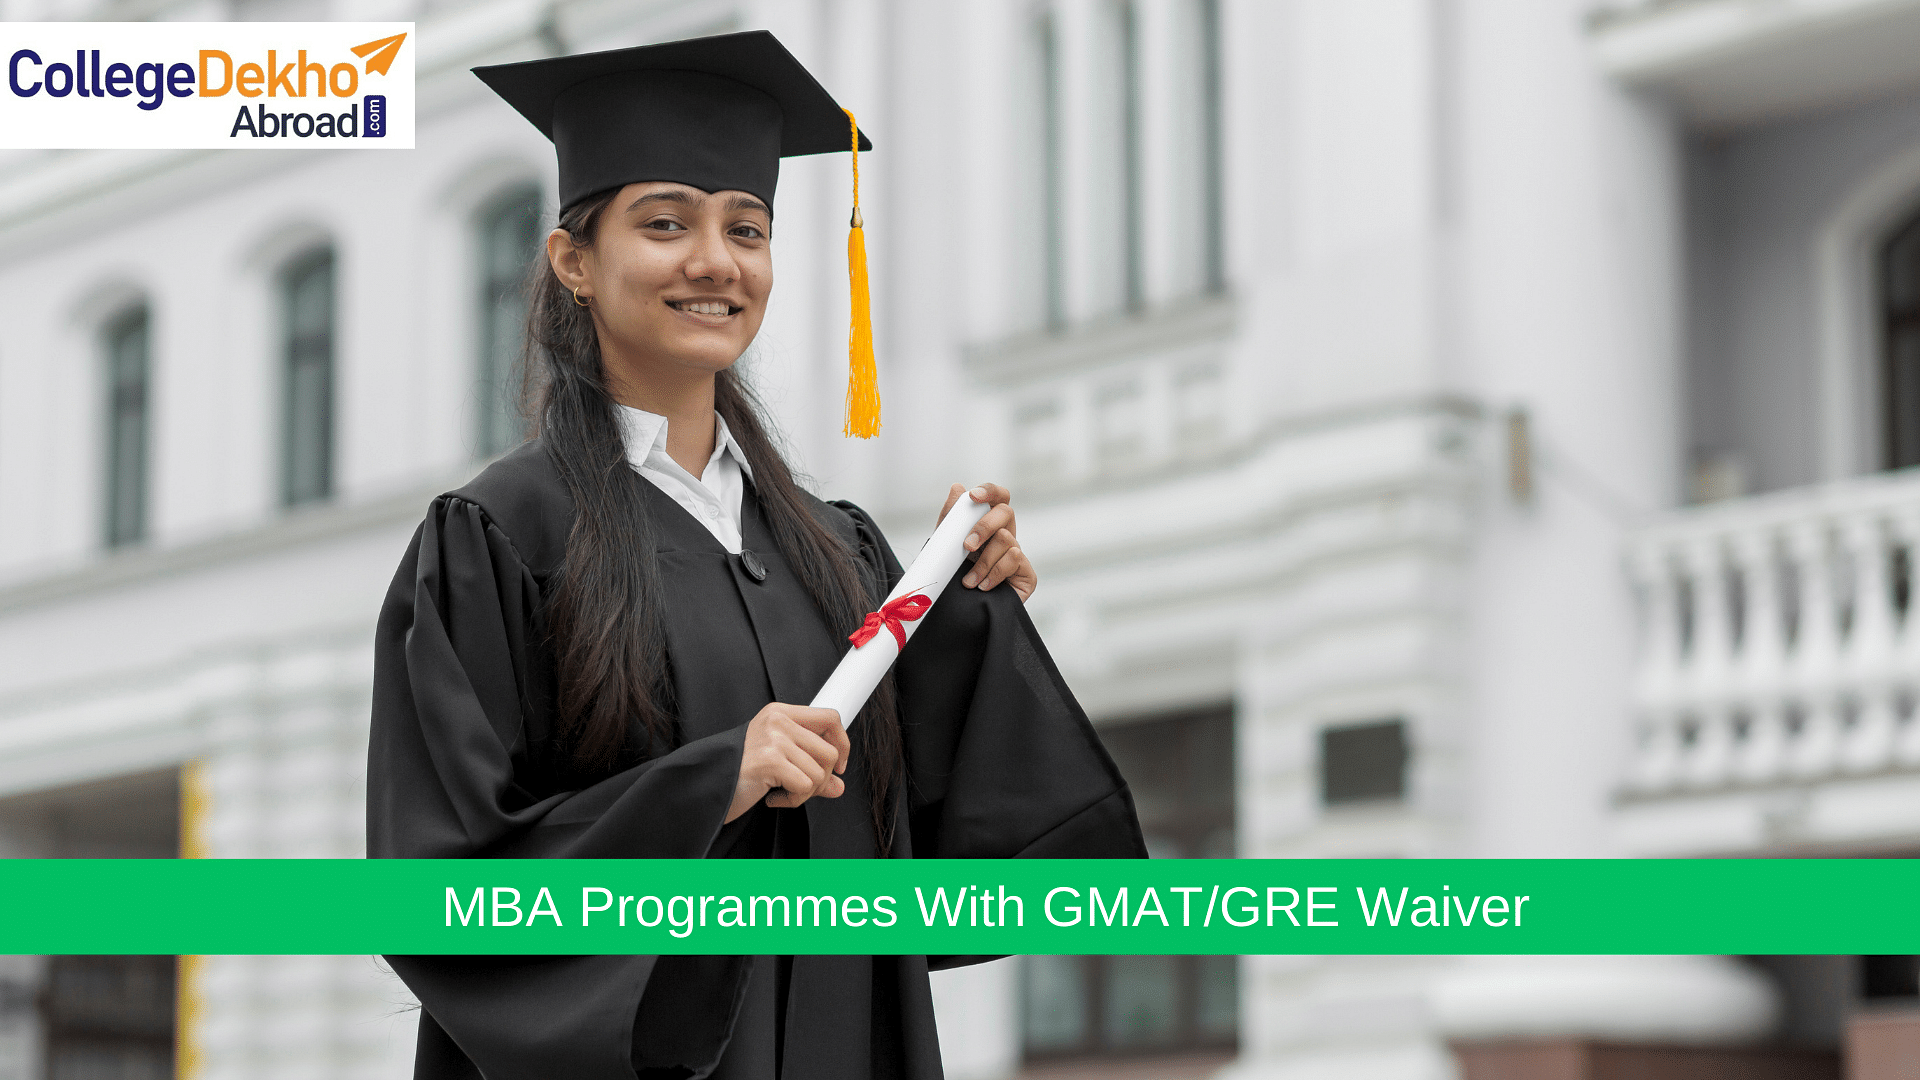 MBA Programmes With GMAT/GRE Waiver